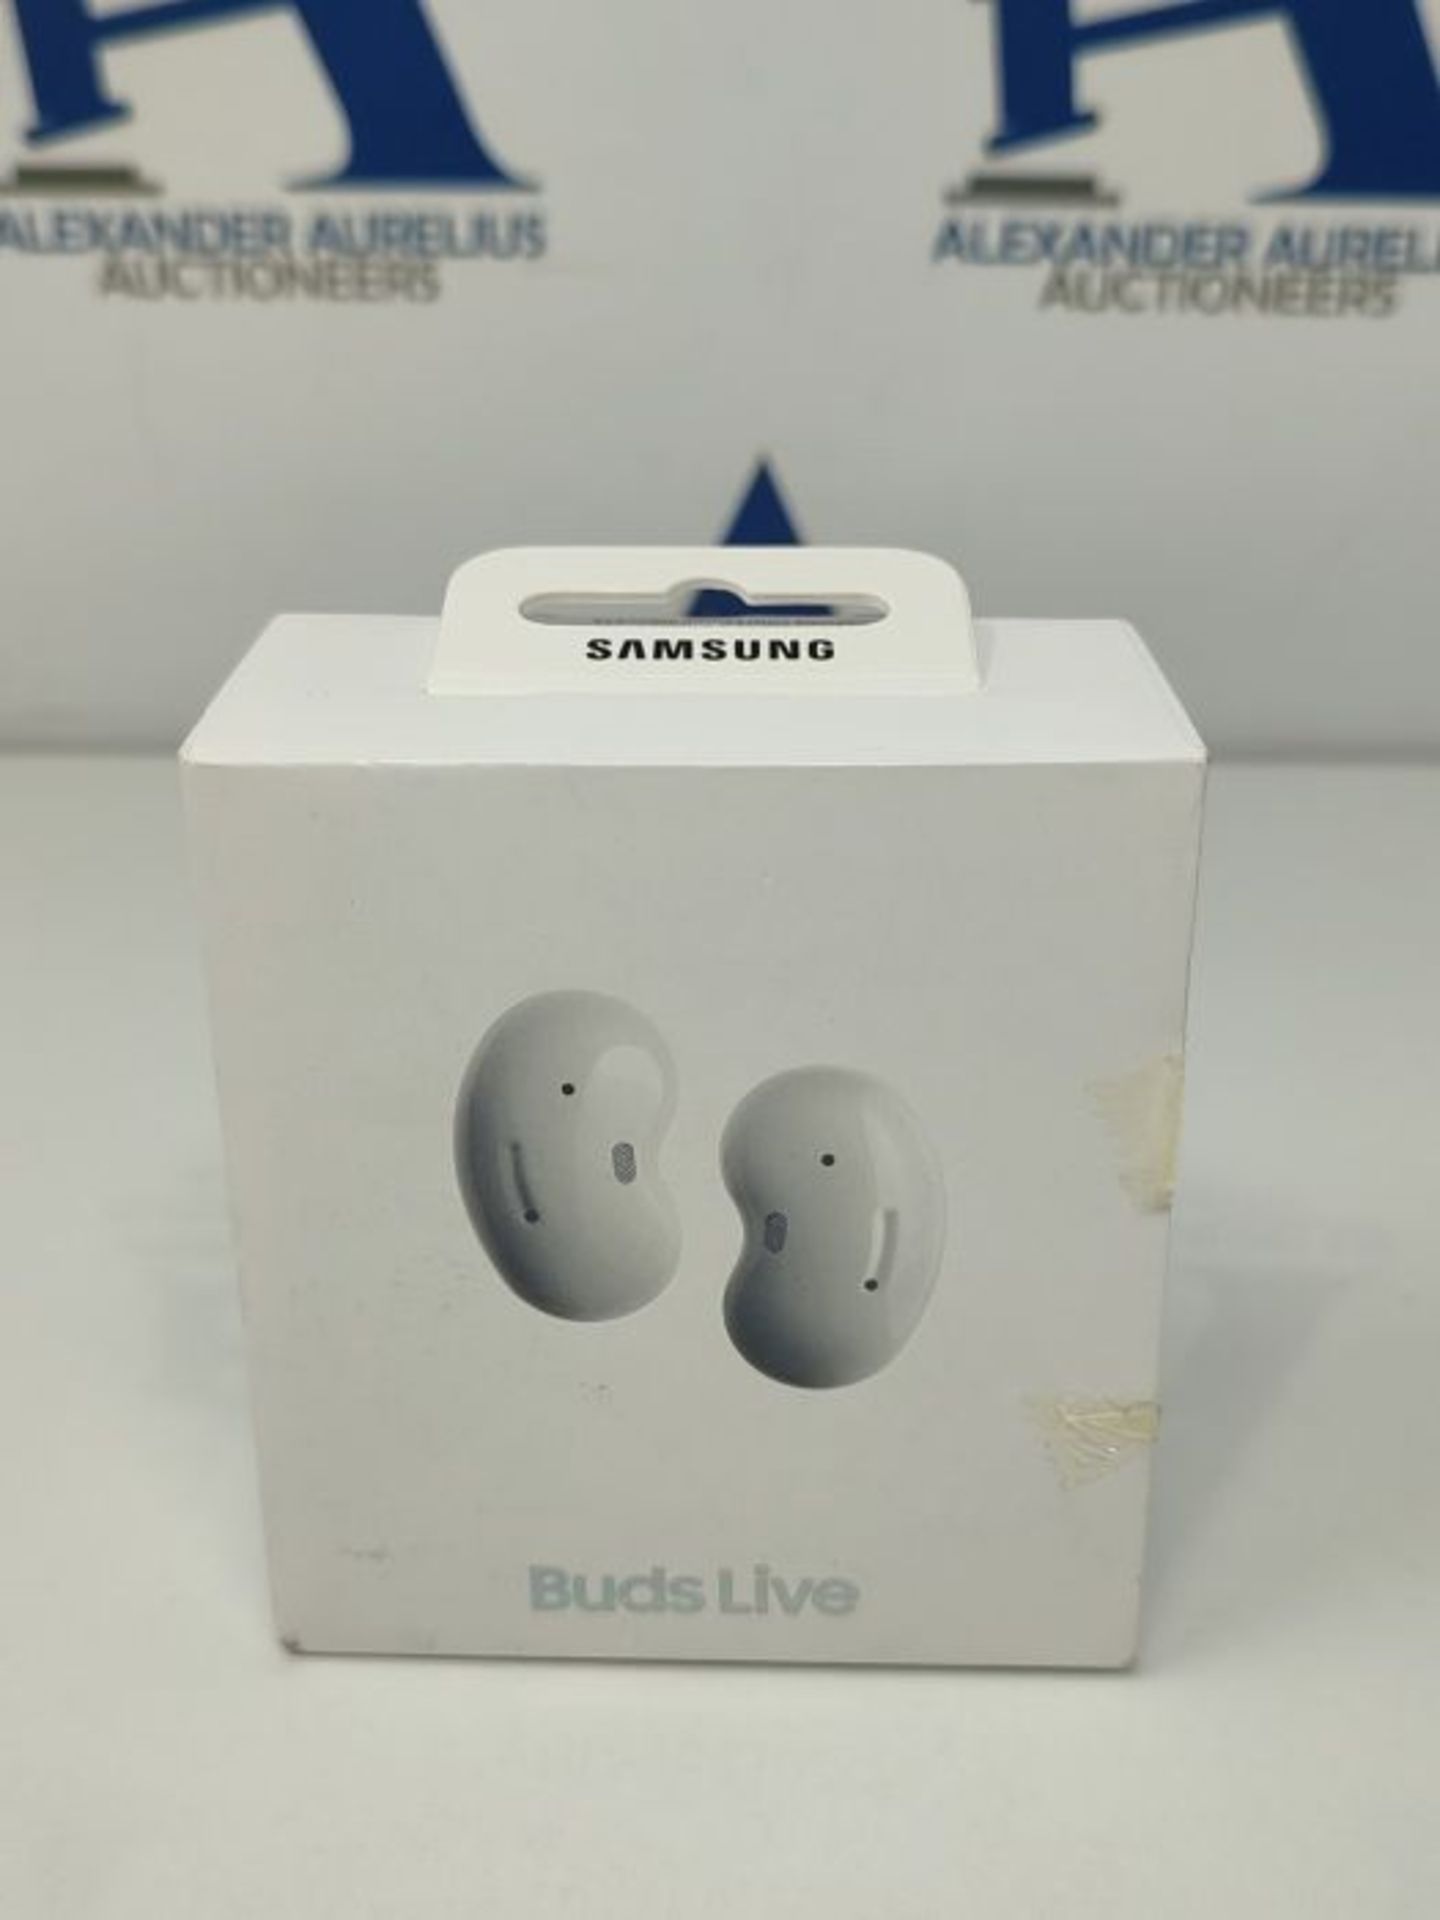 RRP £69.00 Samsung Galaxy Buds Live Wireless Earphones, 2 Year Manufacturer Warranty, Mystic Whit - Image 2 of 3